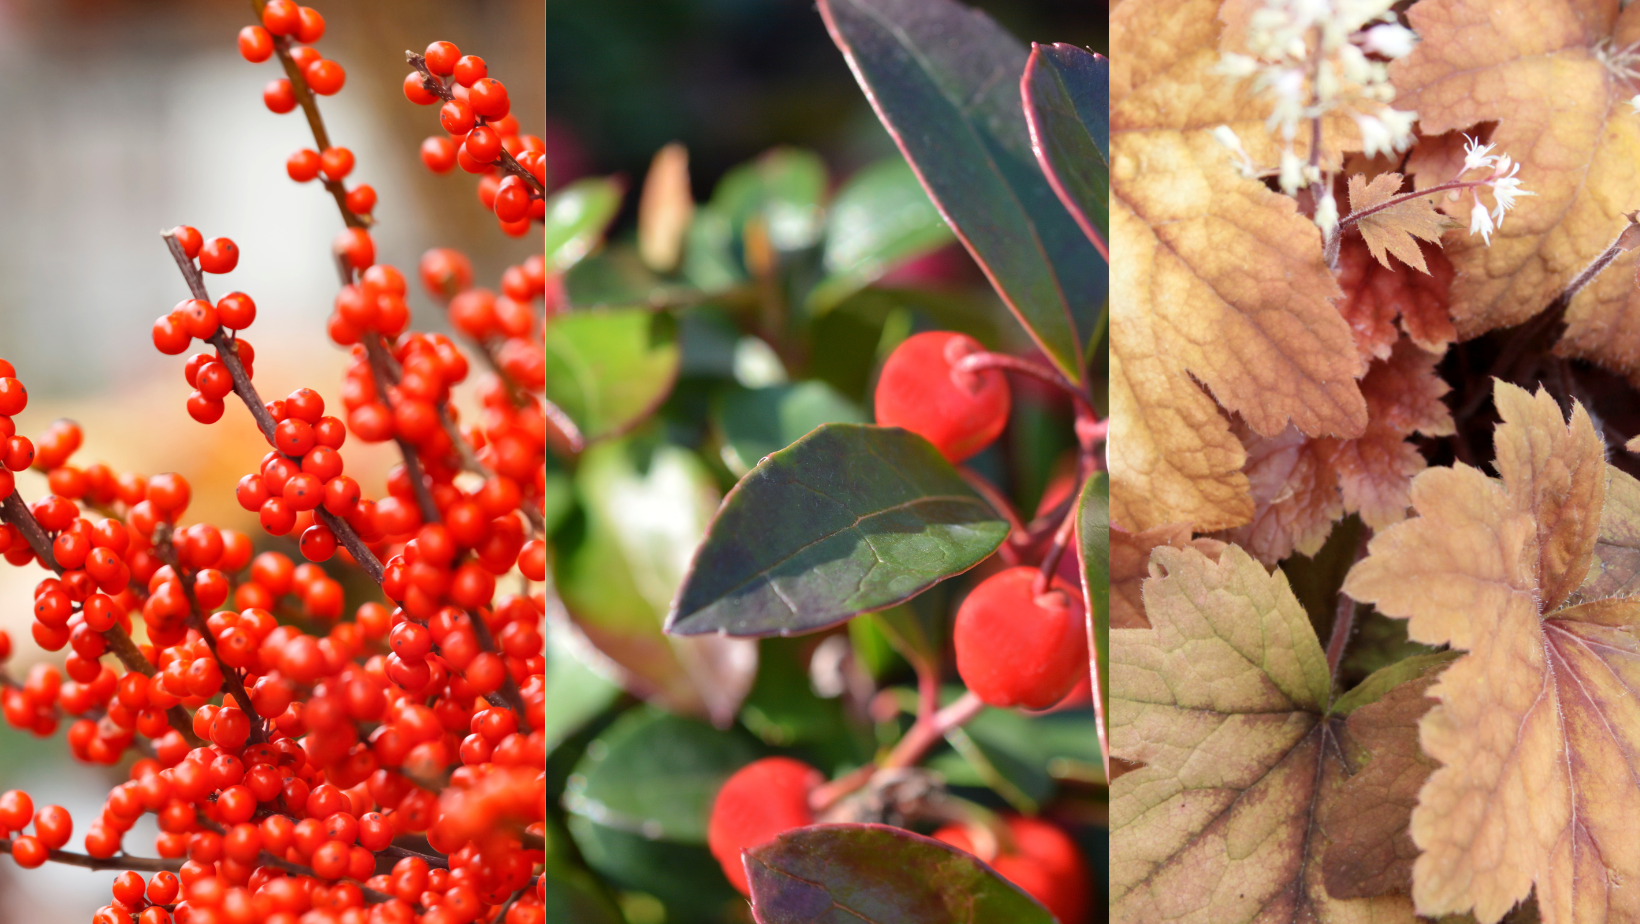 Brave the winter chill and uncover Delaware's hidden gems with these hardy perennials!